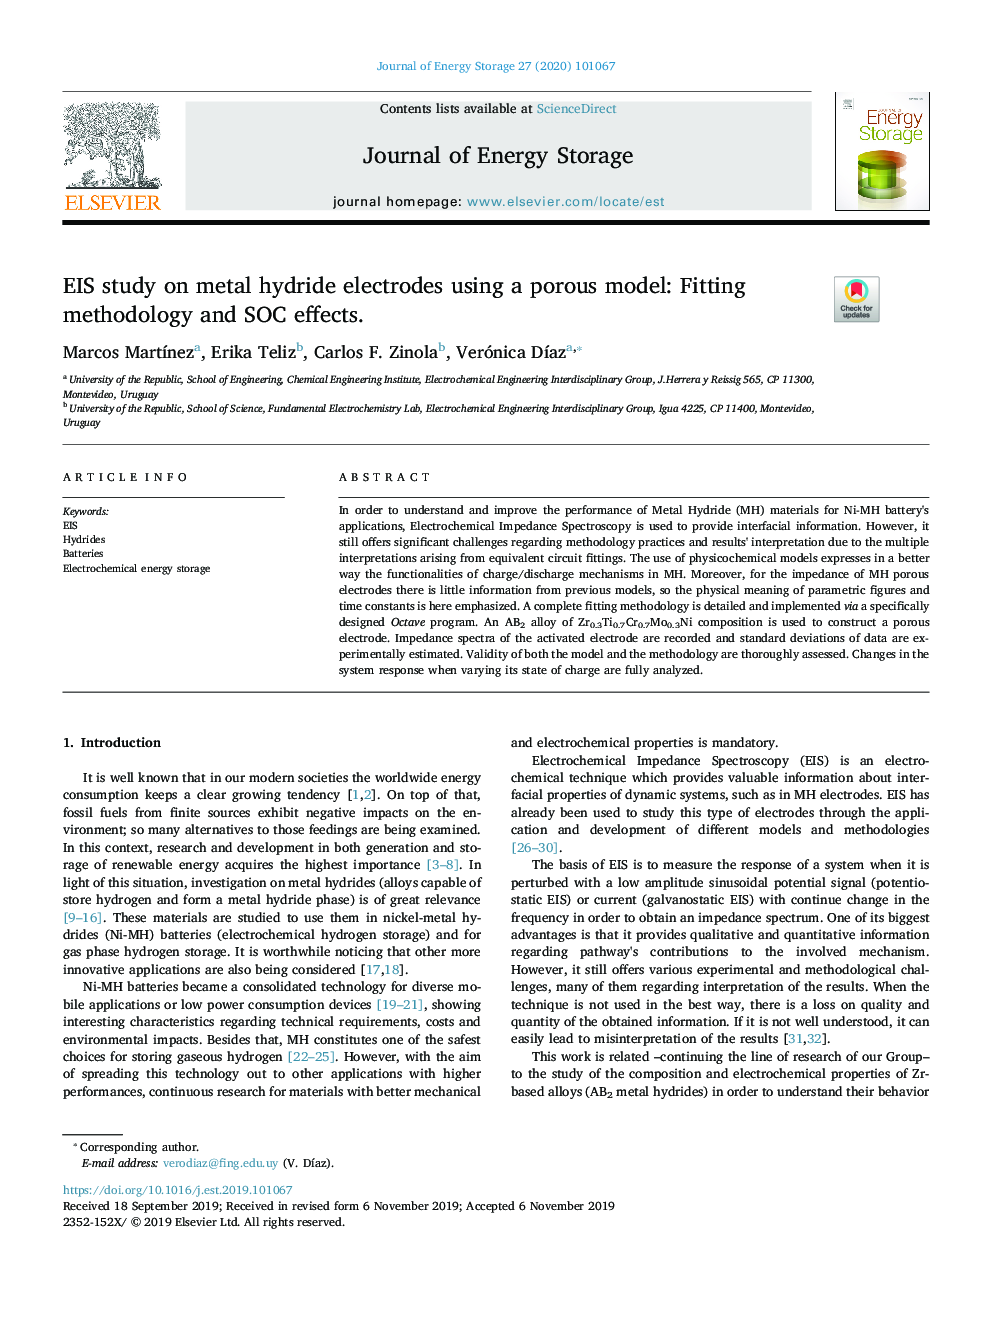 EIS study on metal hydride electrodes using a porous model: Fitting methodology and SOC effects.